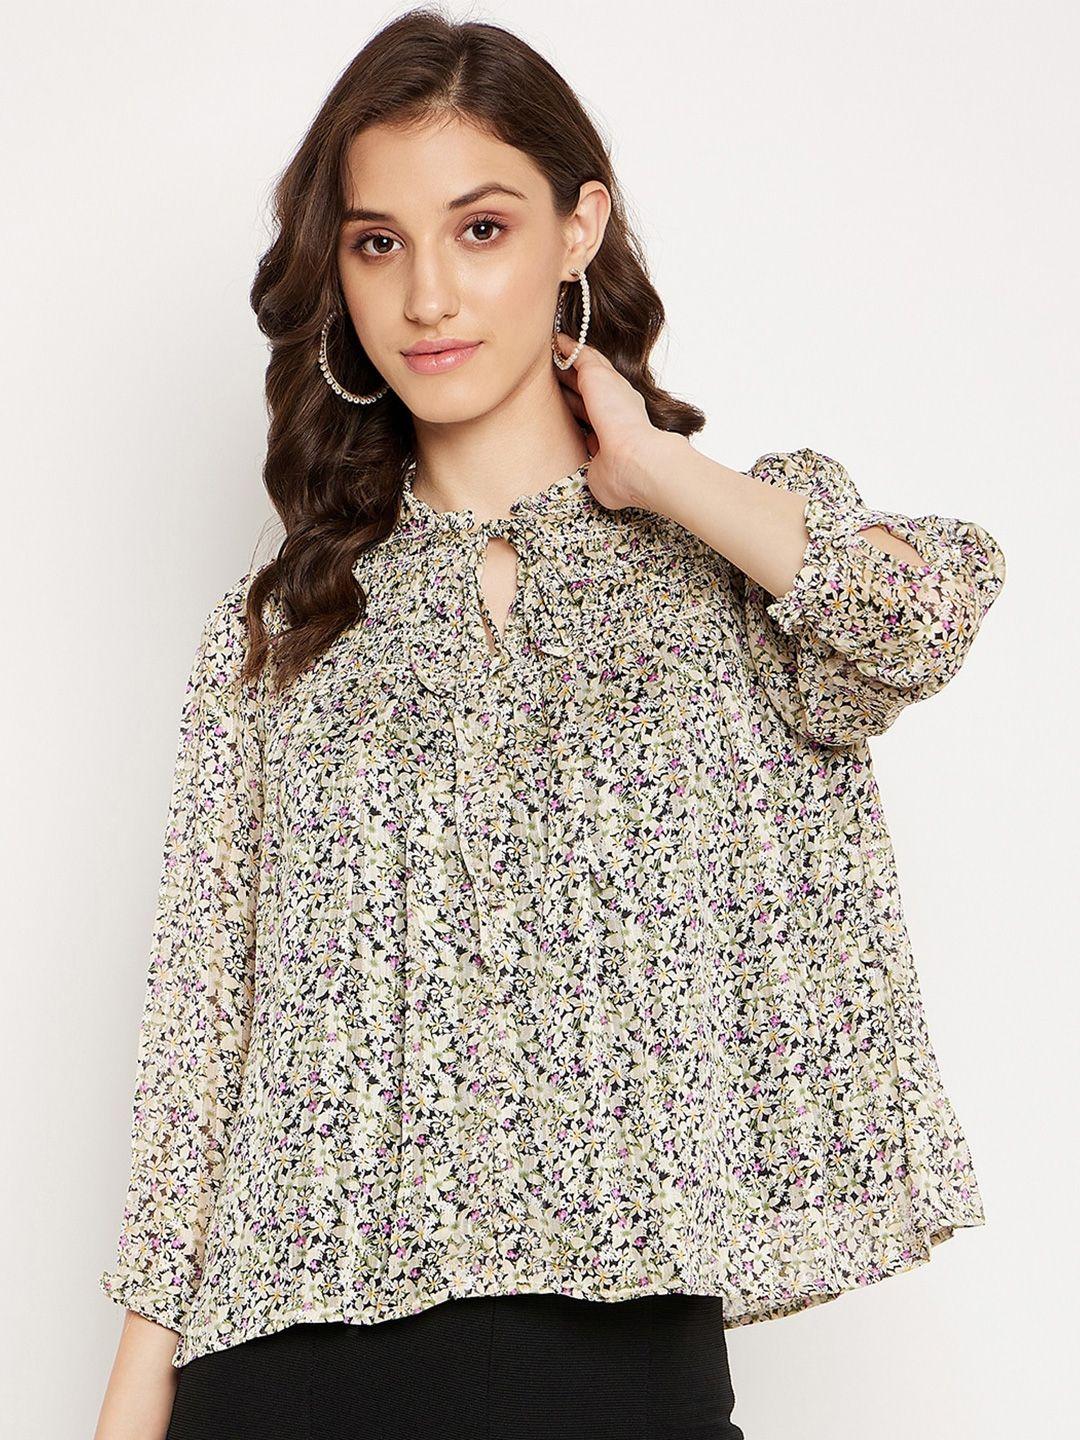 madame-\floral-printed-tie-up-neck-puff-sleeve-smocked-a-line-top